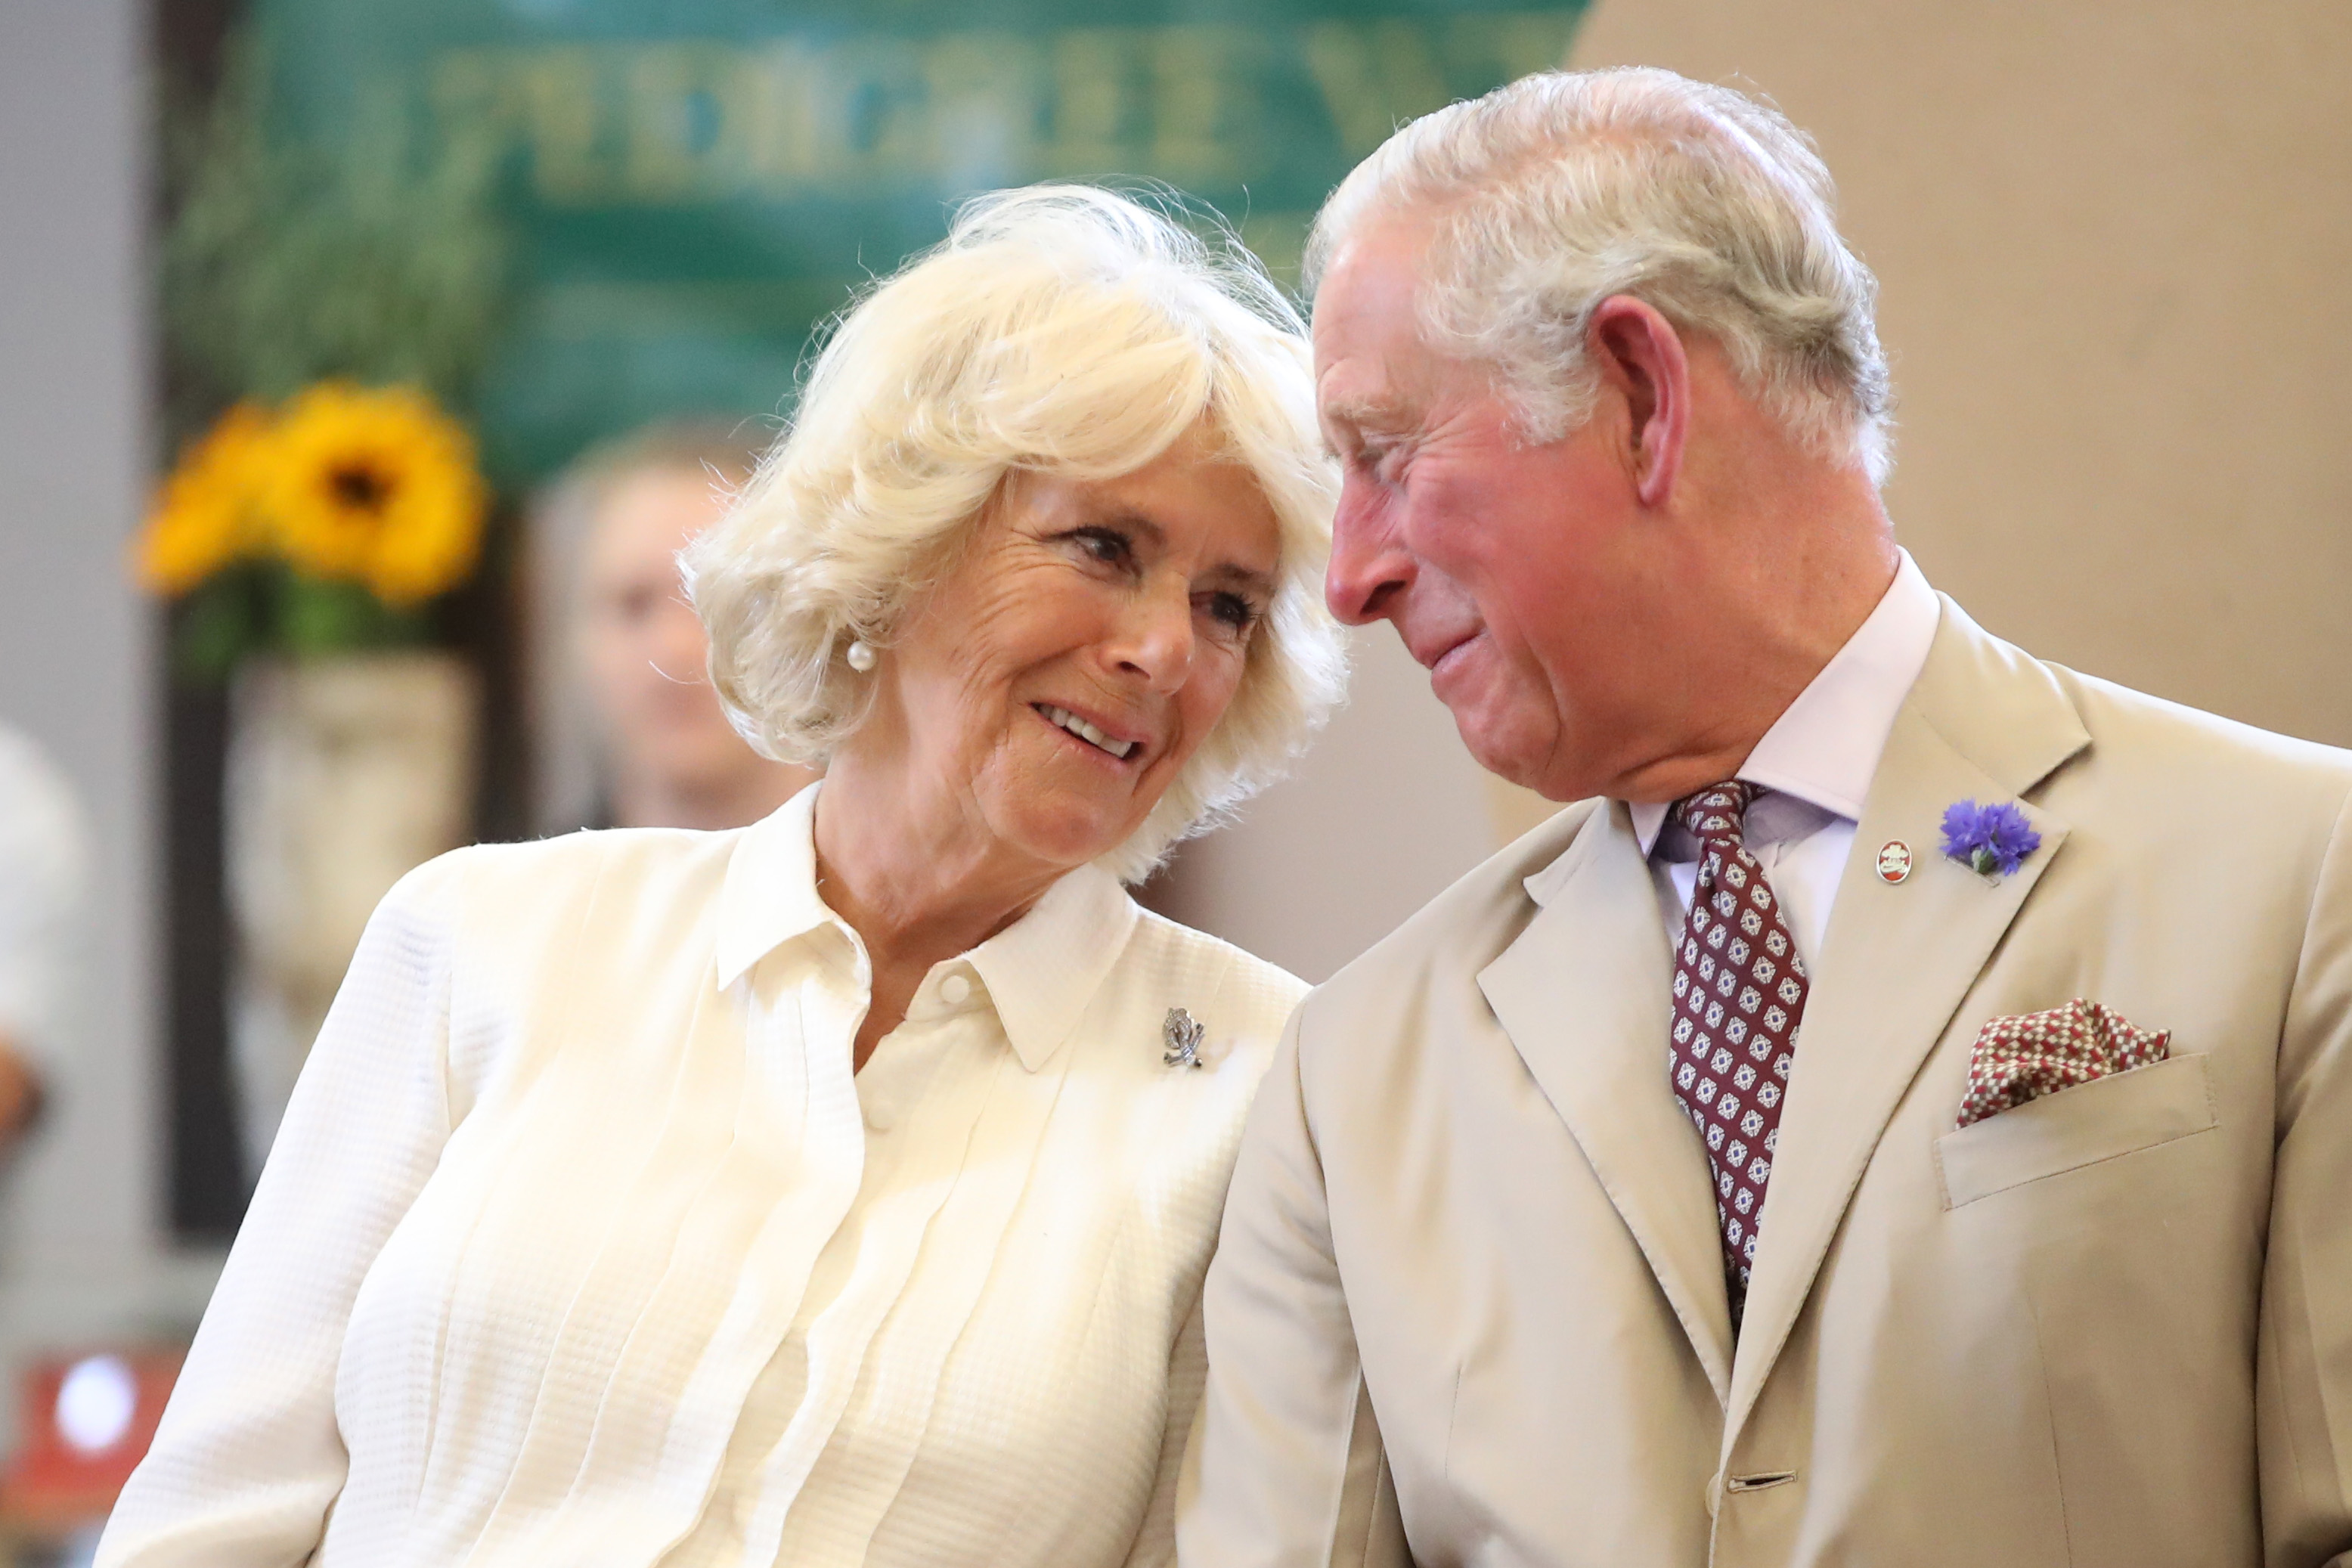 Prince Charles, Prince of Wales and Camilla, Duchess of Cornwall look at each other as they reopen the newly-renovated The Strand Hall in Builth Wells, Wales, on July 4, 2018. | Source: Getty Images